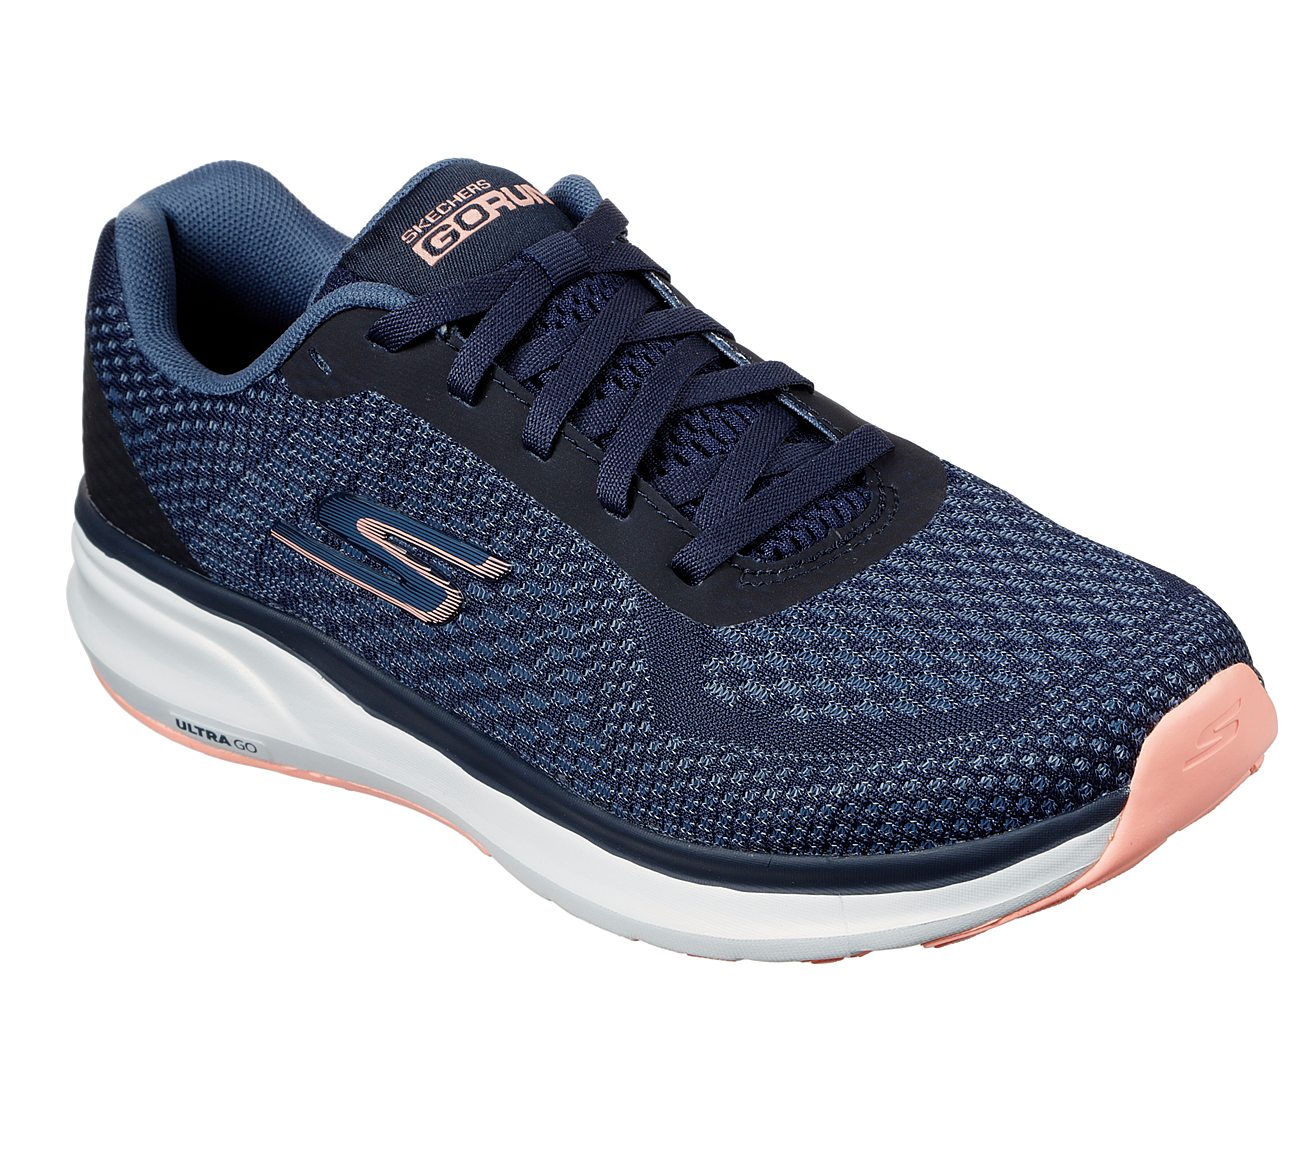 PURE, NAVY/CORAL Footwear Lateral View